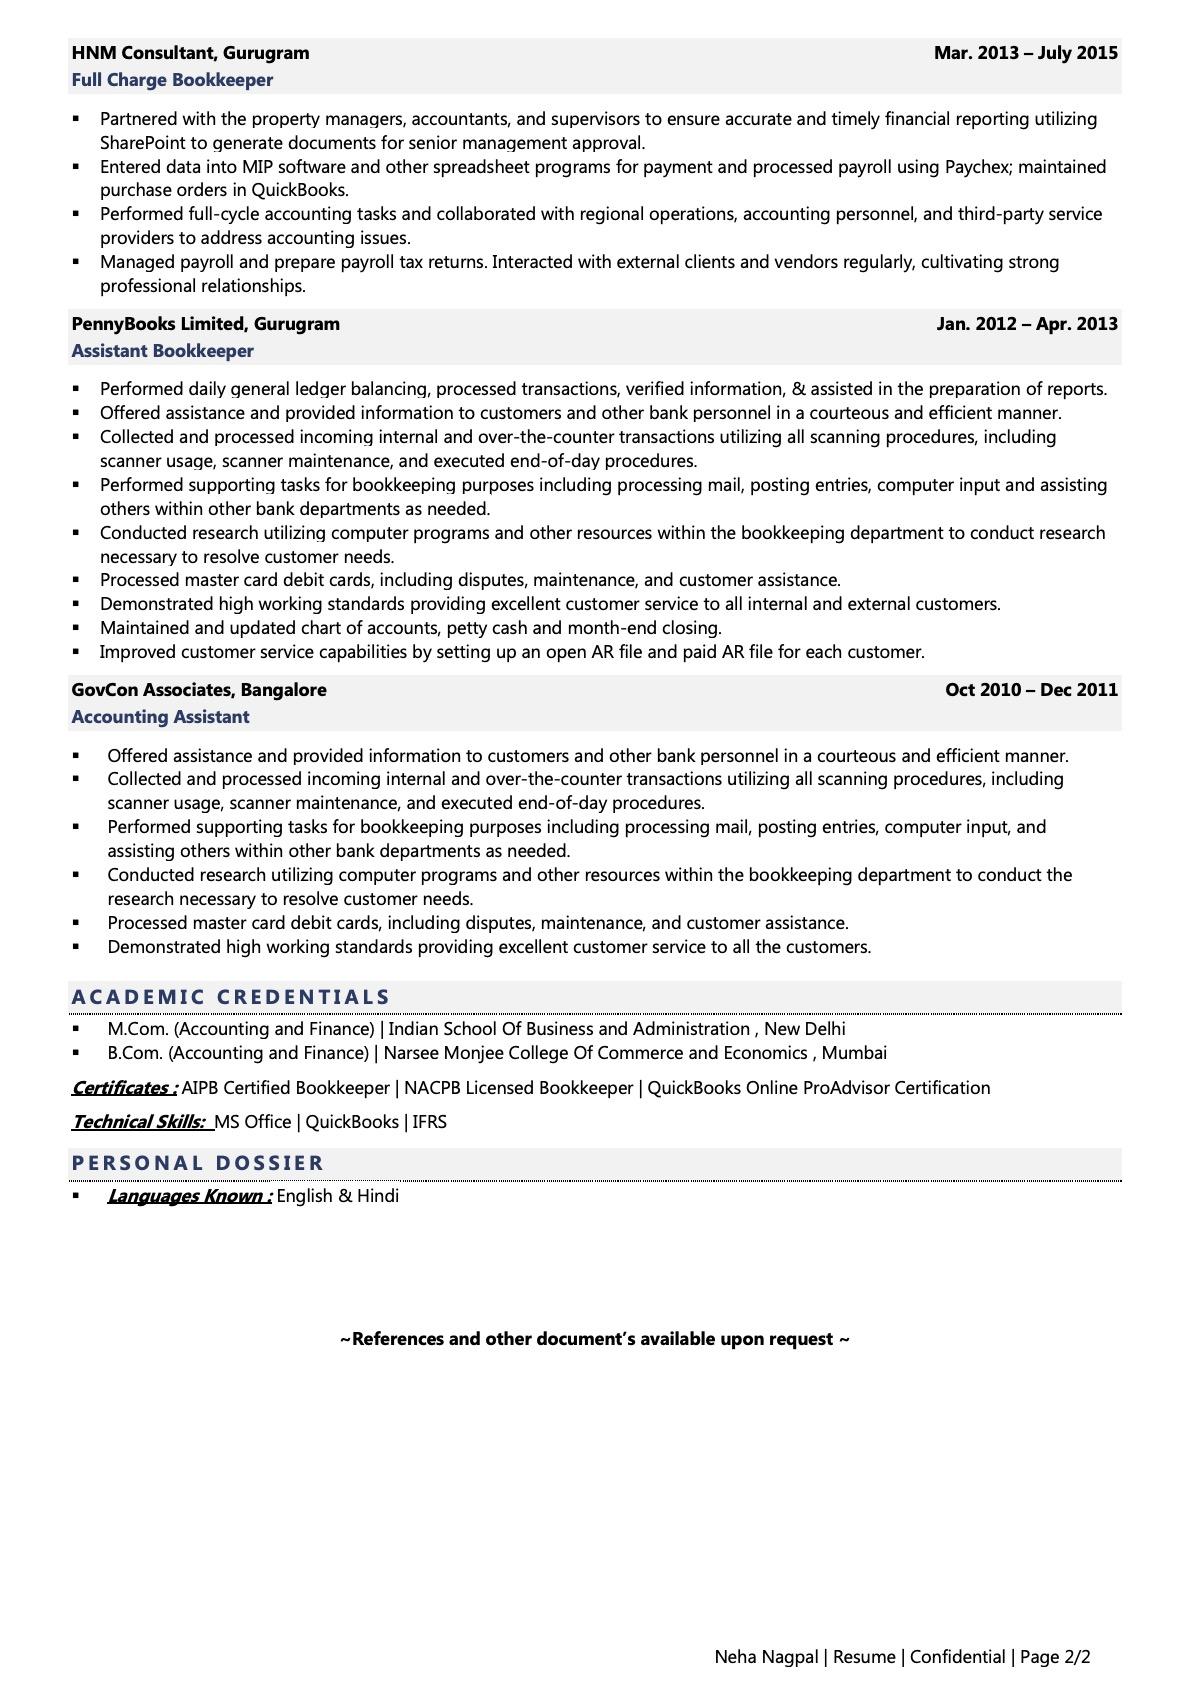 resume summary examples for bookkeeper